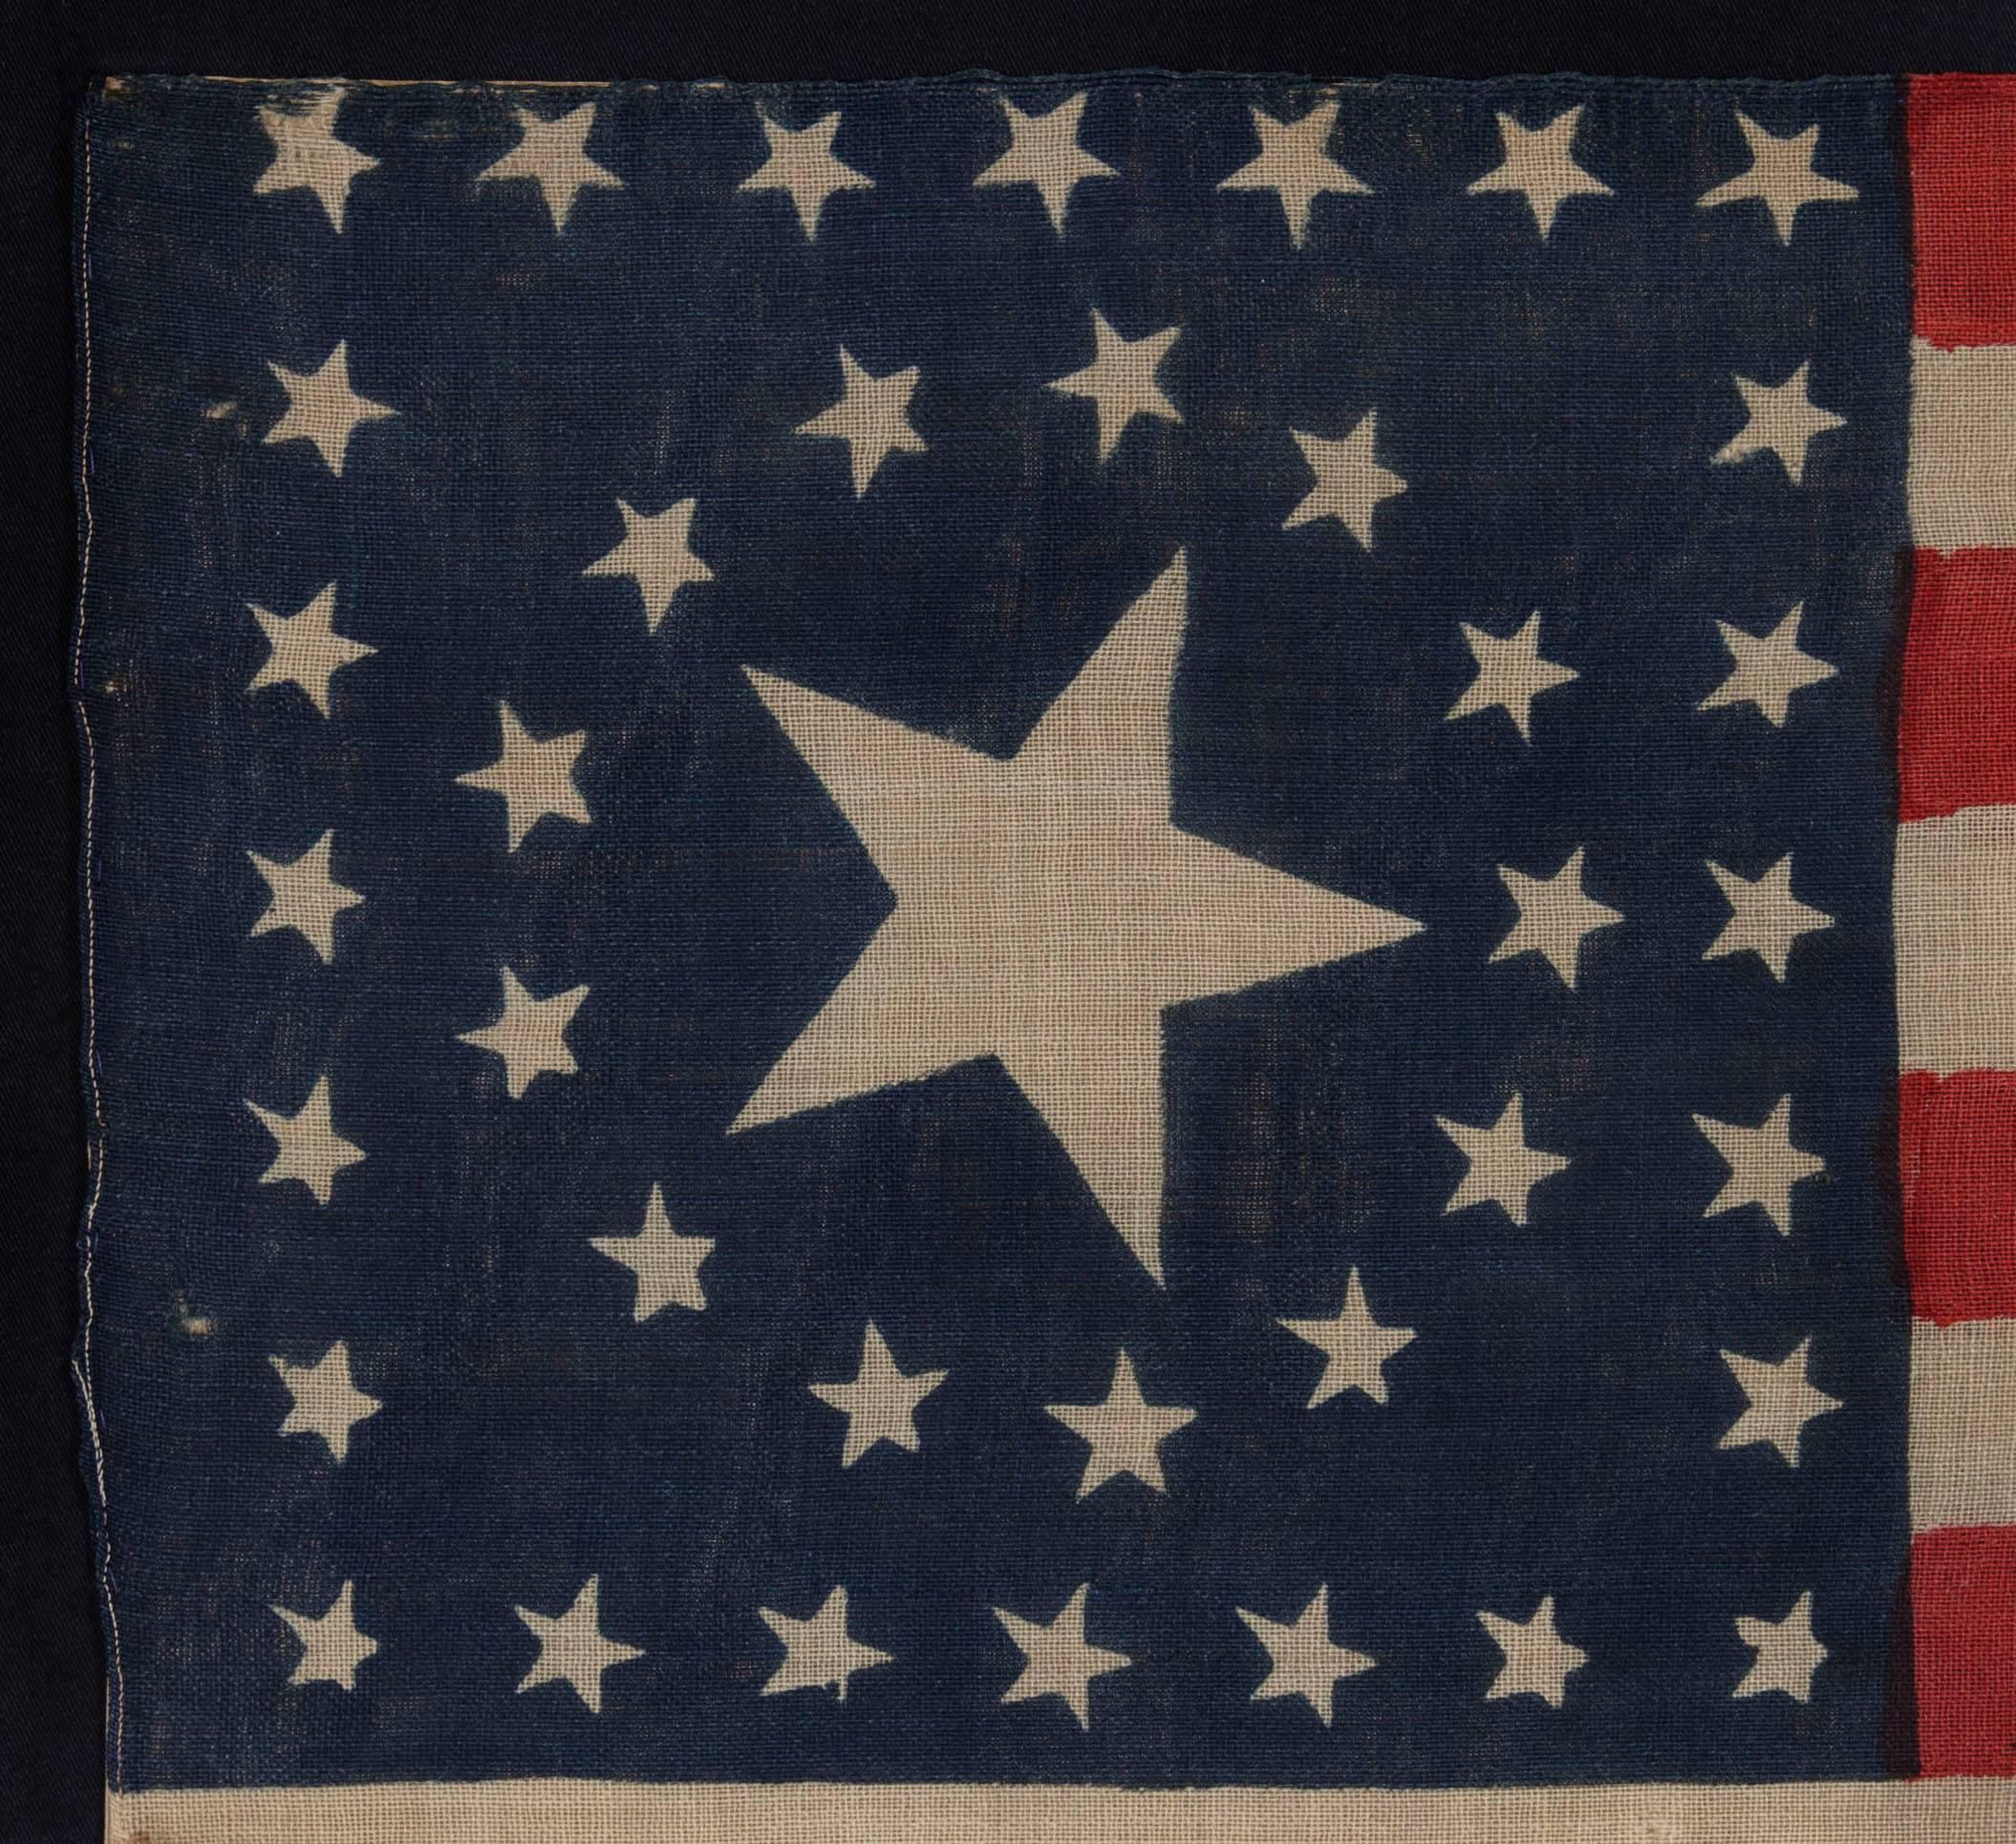 38 STARS IN A RARE CIRCLE-IN-A-SQUARE MEDALLION WITH A HUGE CENTER STAR, ON AN ANTIQUE AMERICAN FLAG MADE FOR THE 1876 CENTENNIAL CELEBRATION BY HORSTMANN BROS. OF PHILADELPHIA:

38 star American national flag, press-dyed on wool bunting. The stars